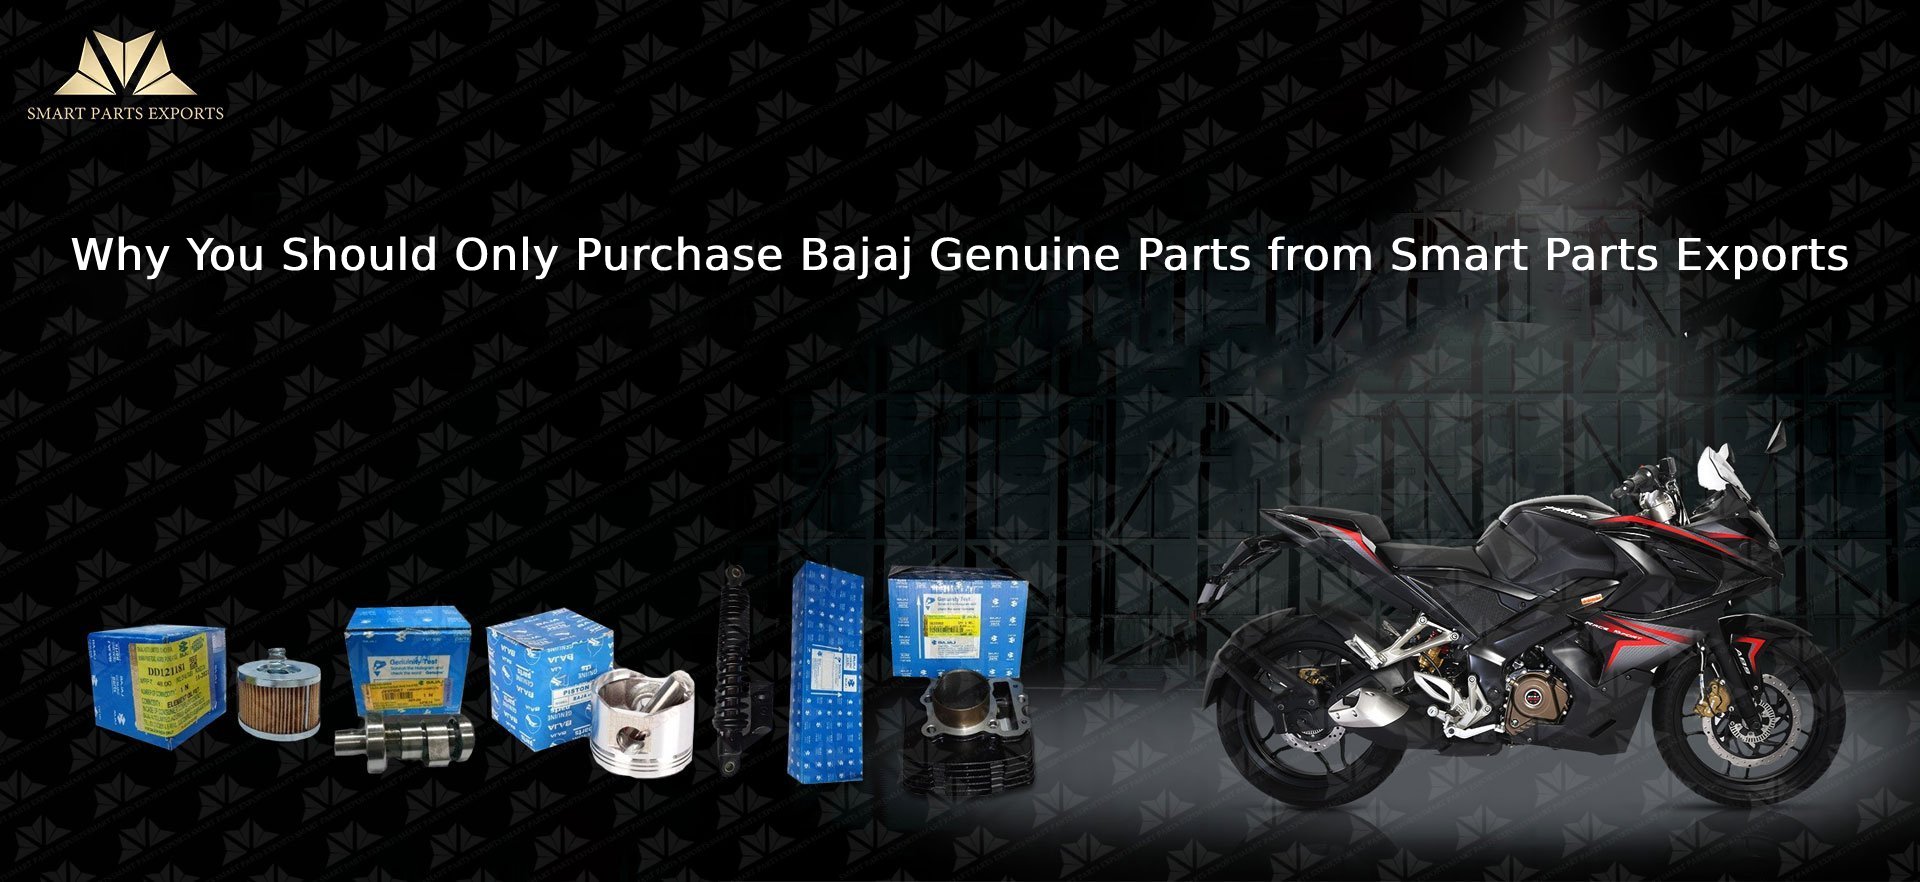 Bajaj Genuine Parts exporter from India: Smart Parts Exports